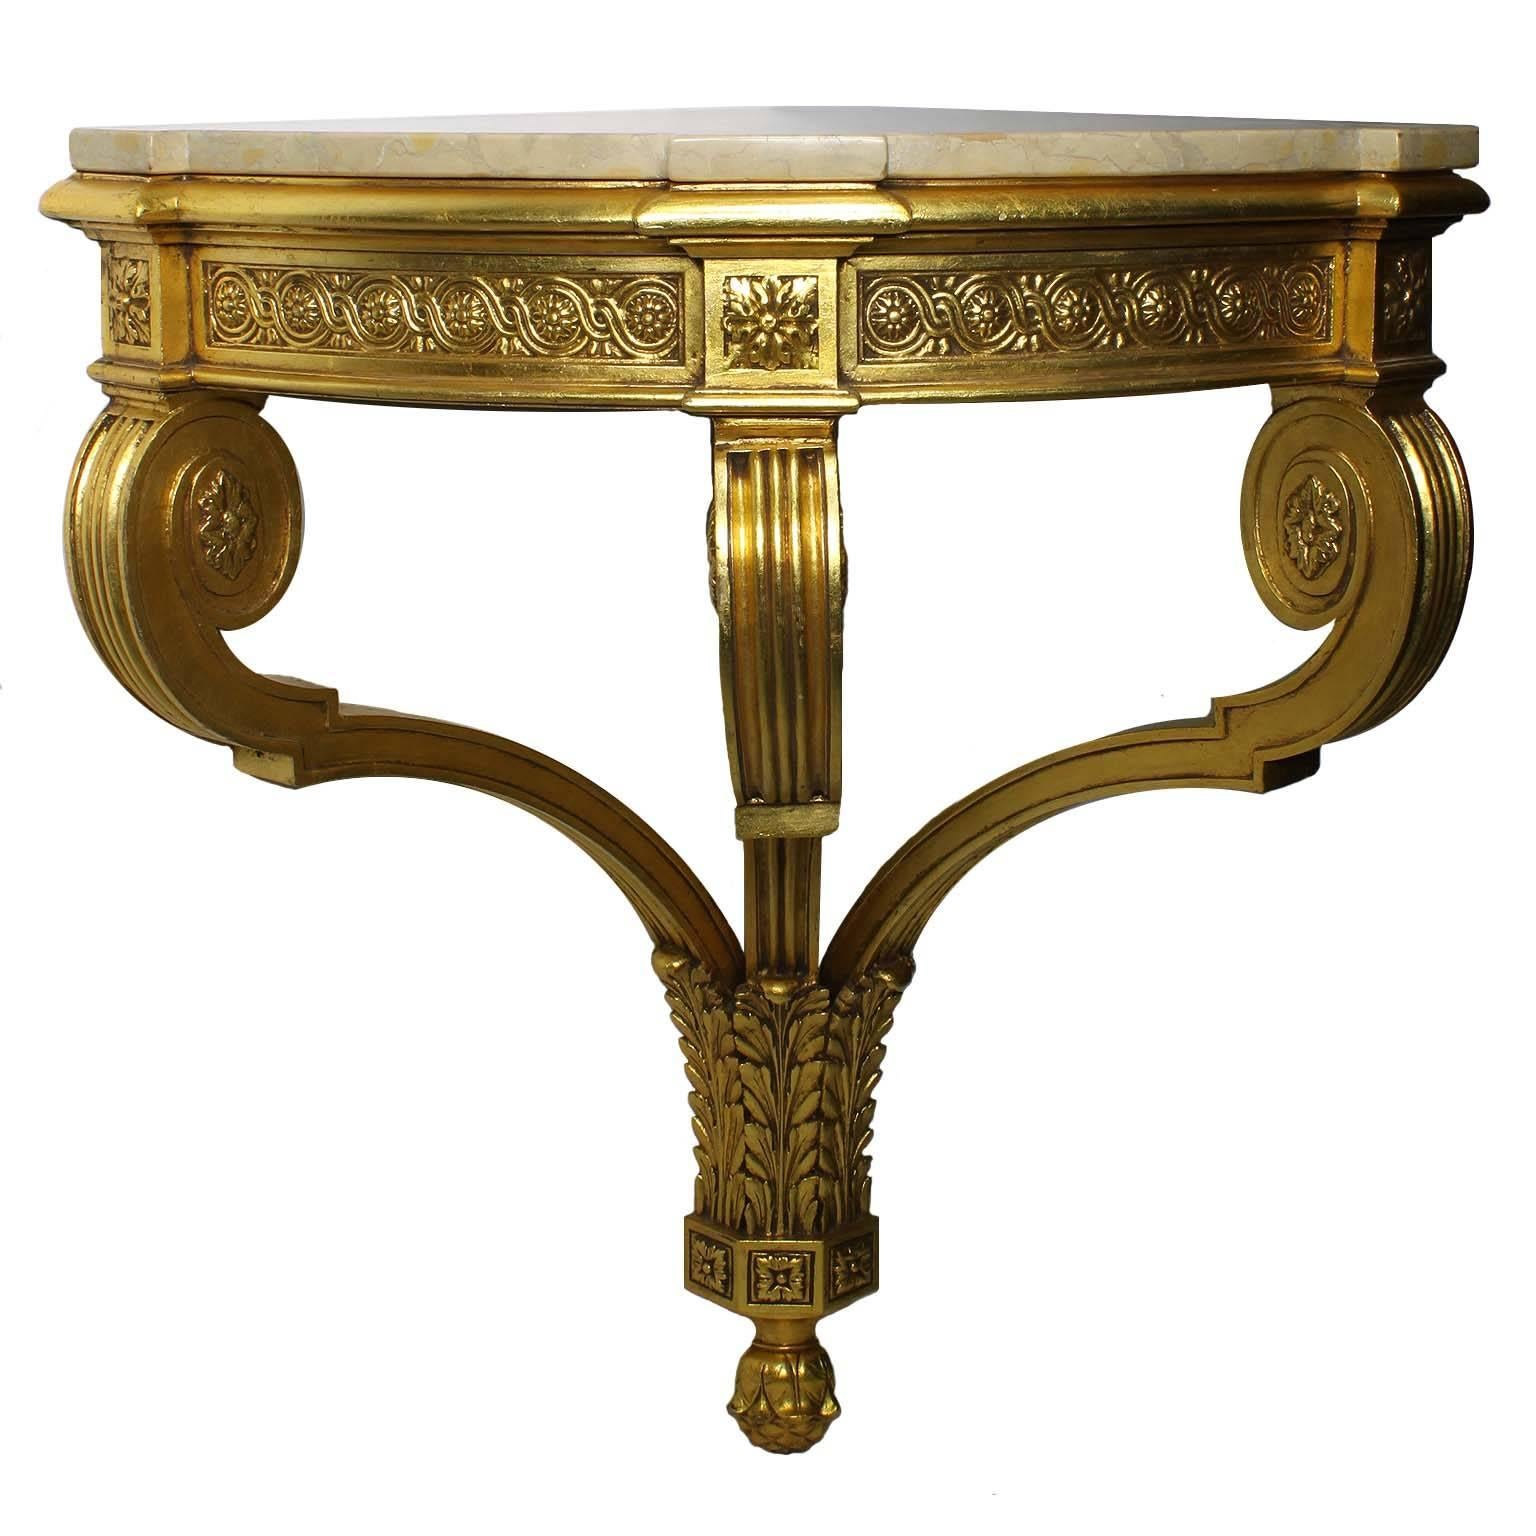 A pair of French Belle Époque 19th-20th century Louis XV style giltwood carved wall mounting corner-console tables with marble top. The tripod leg consoles with scrolled supports and an acanthus base with rosette and token decorations. The mottled